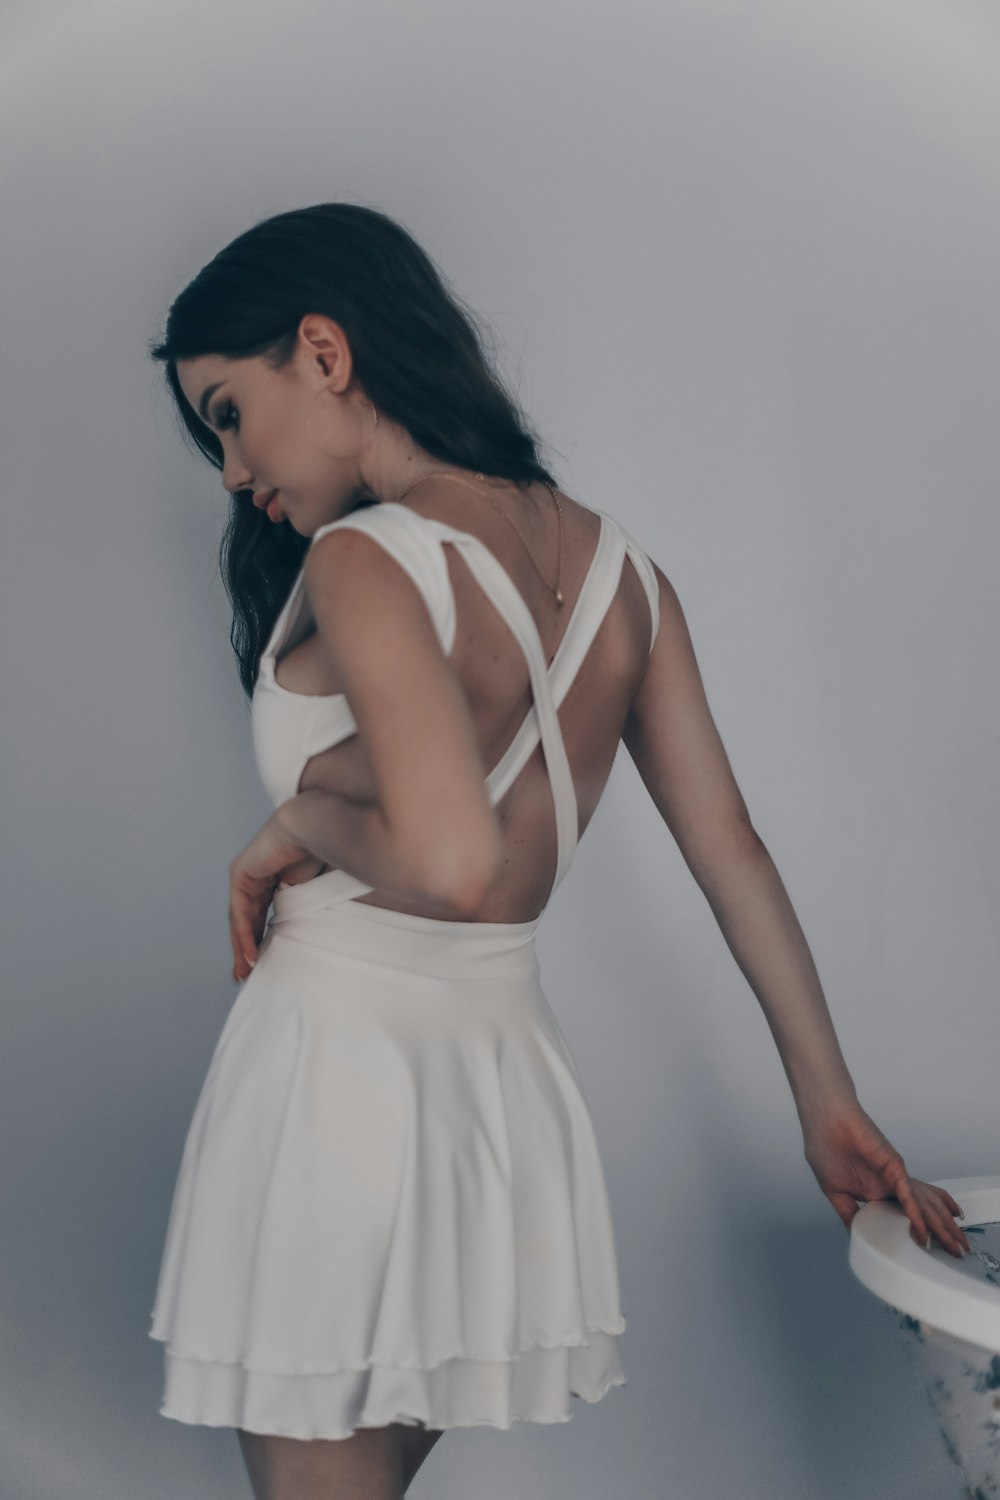 a person in a white dress